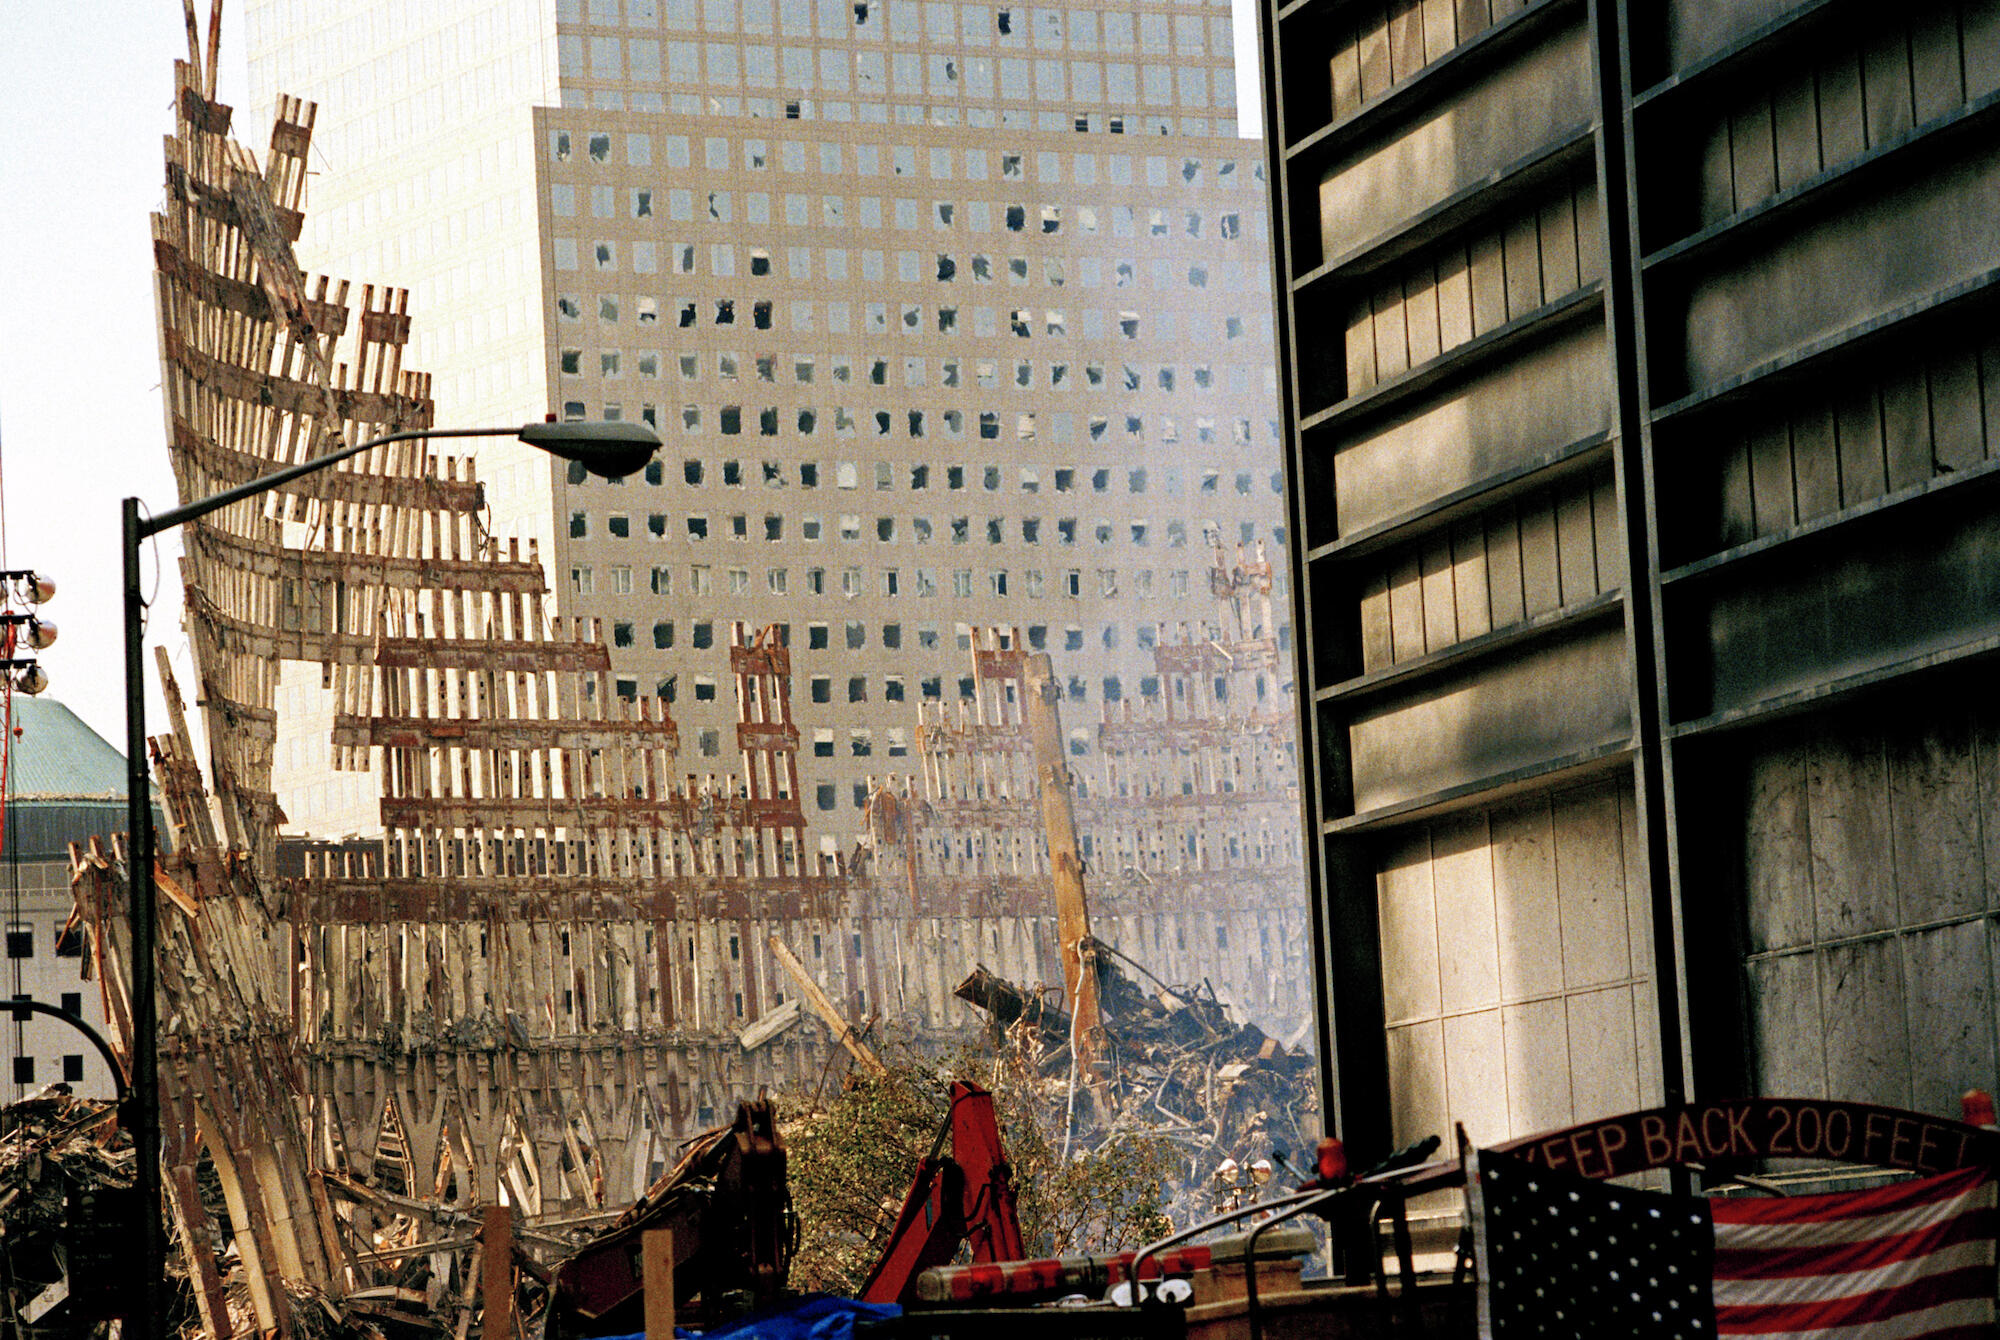 Steel skeleton of the south tower of the World Trade Center Tower days after the 9/11 attacks.